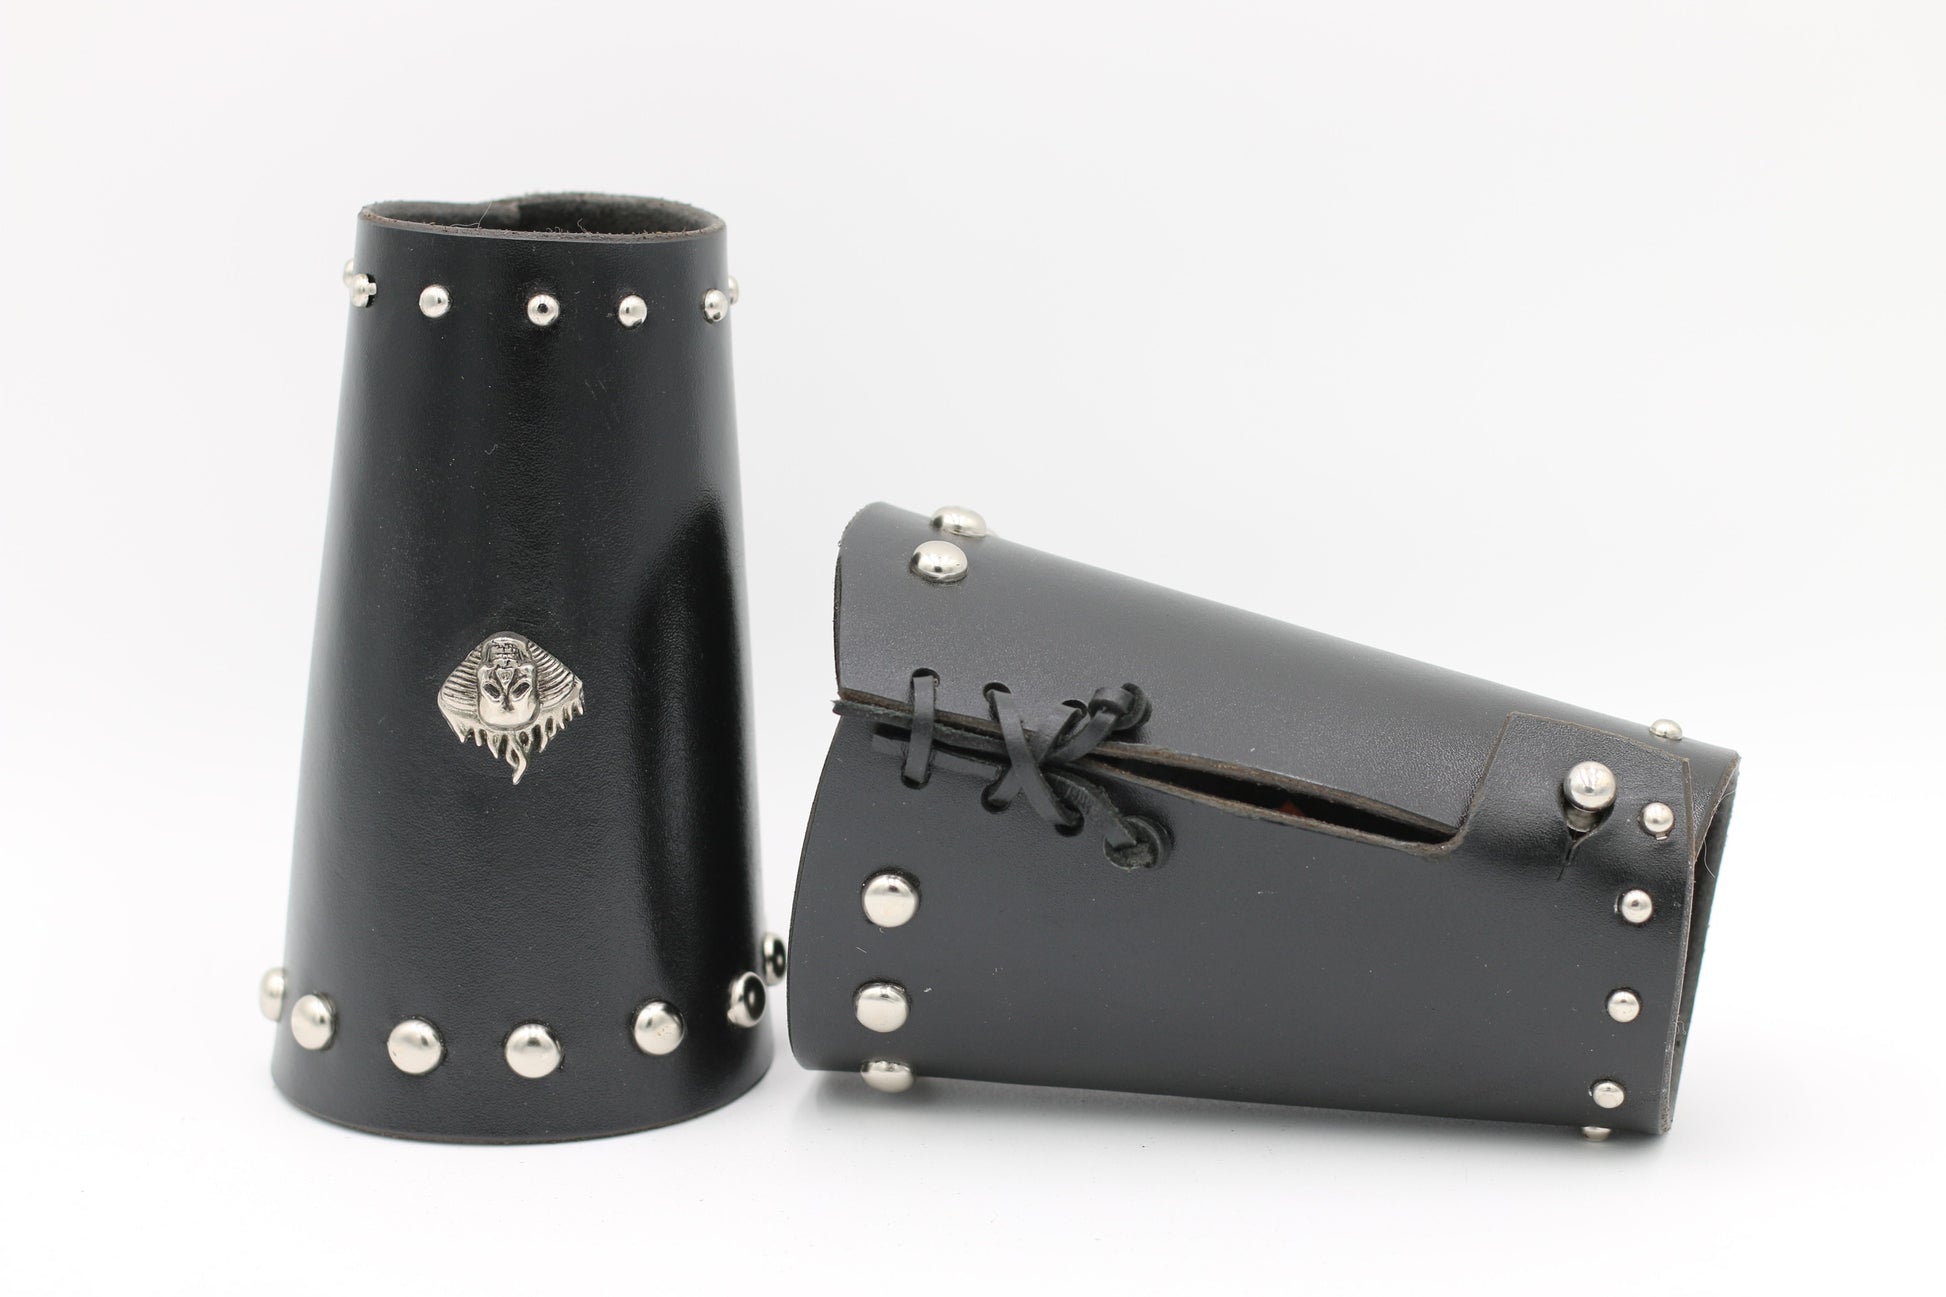 Cuffs Handcrafted Black Leather with Round Studs, Motor Skull Conchos, and Button Fastener - Annabel's Jewelry & Leather